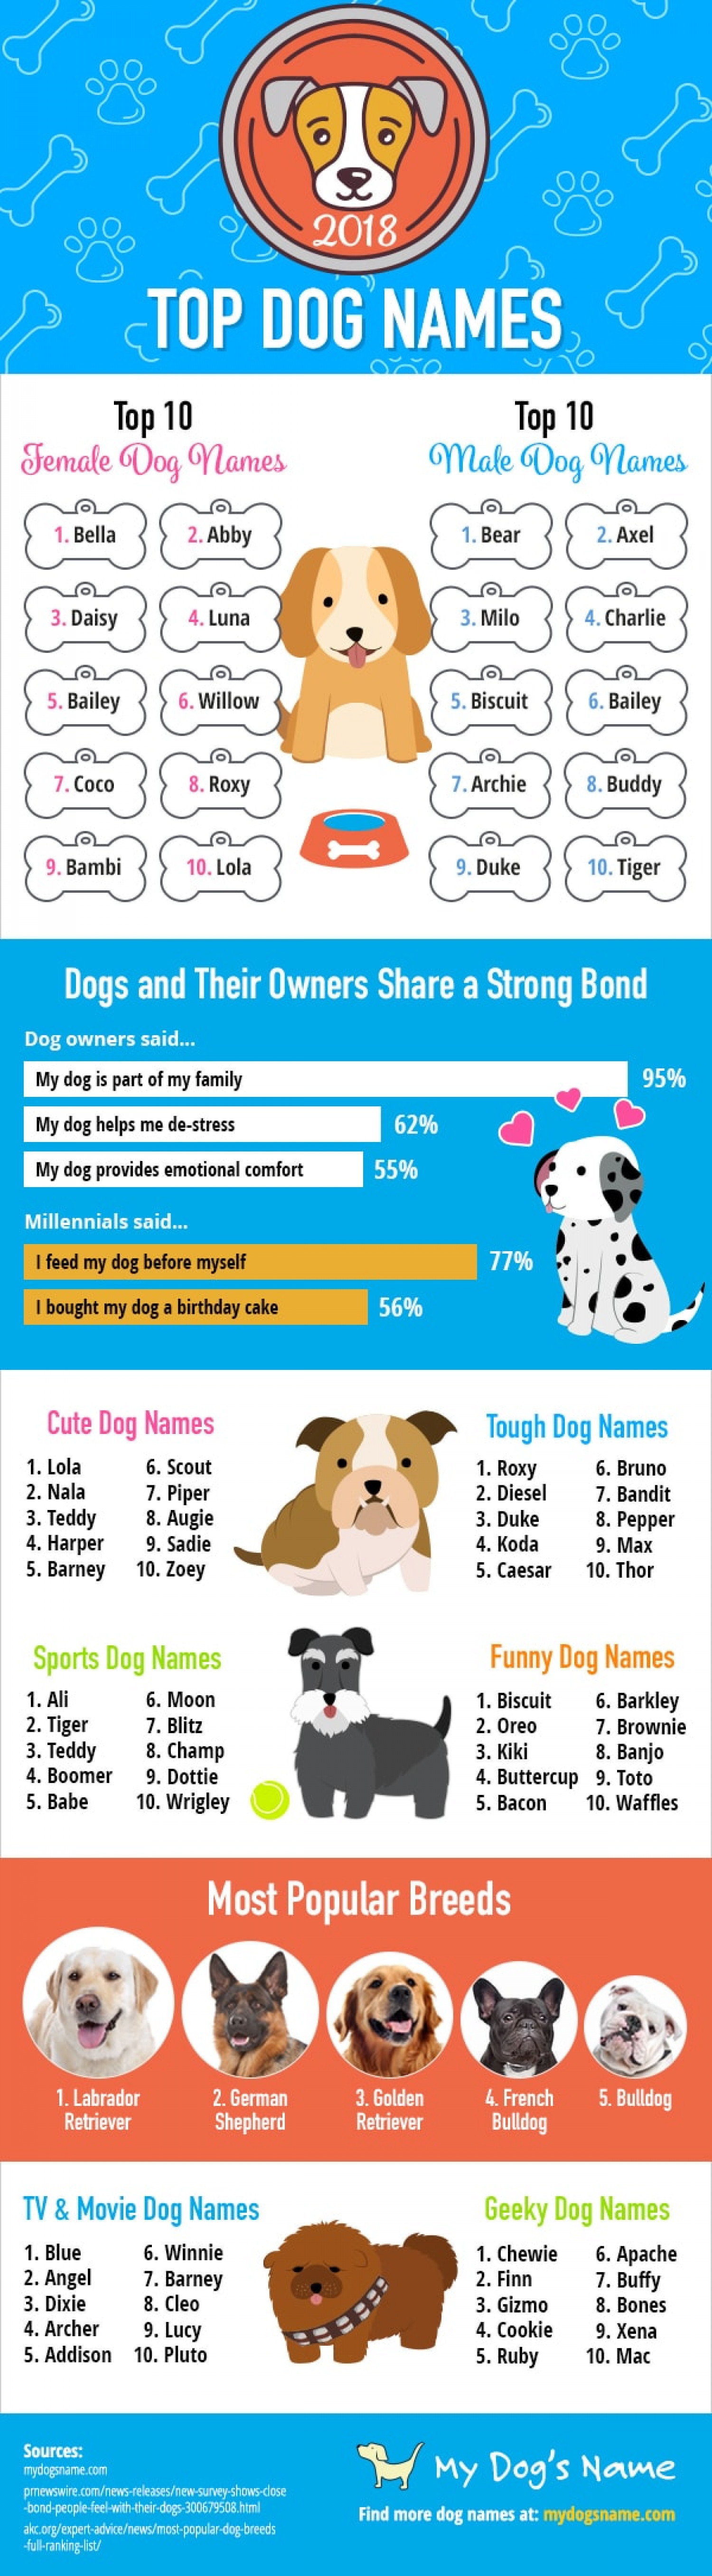 2018 Top Dog Names Infographic Infographic